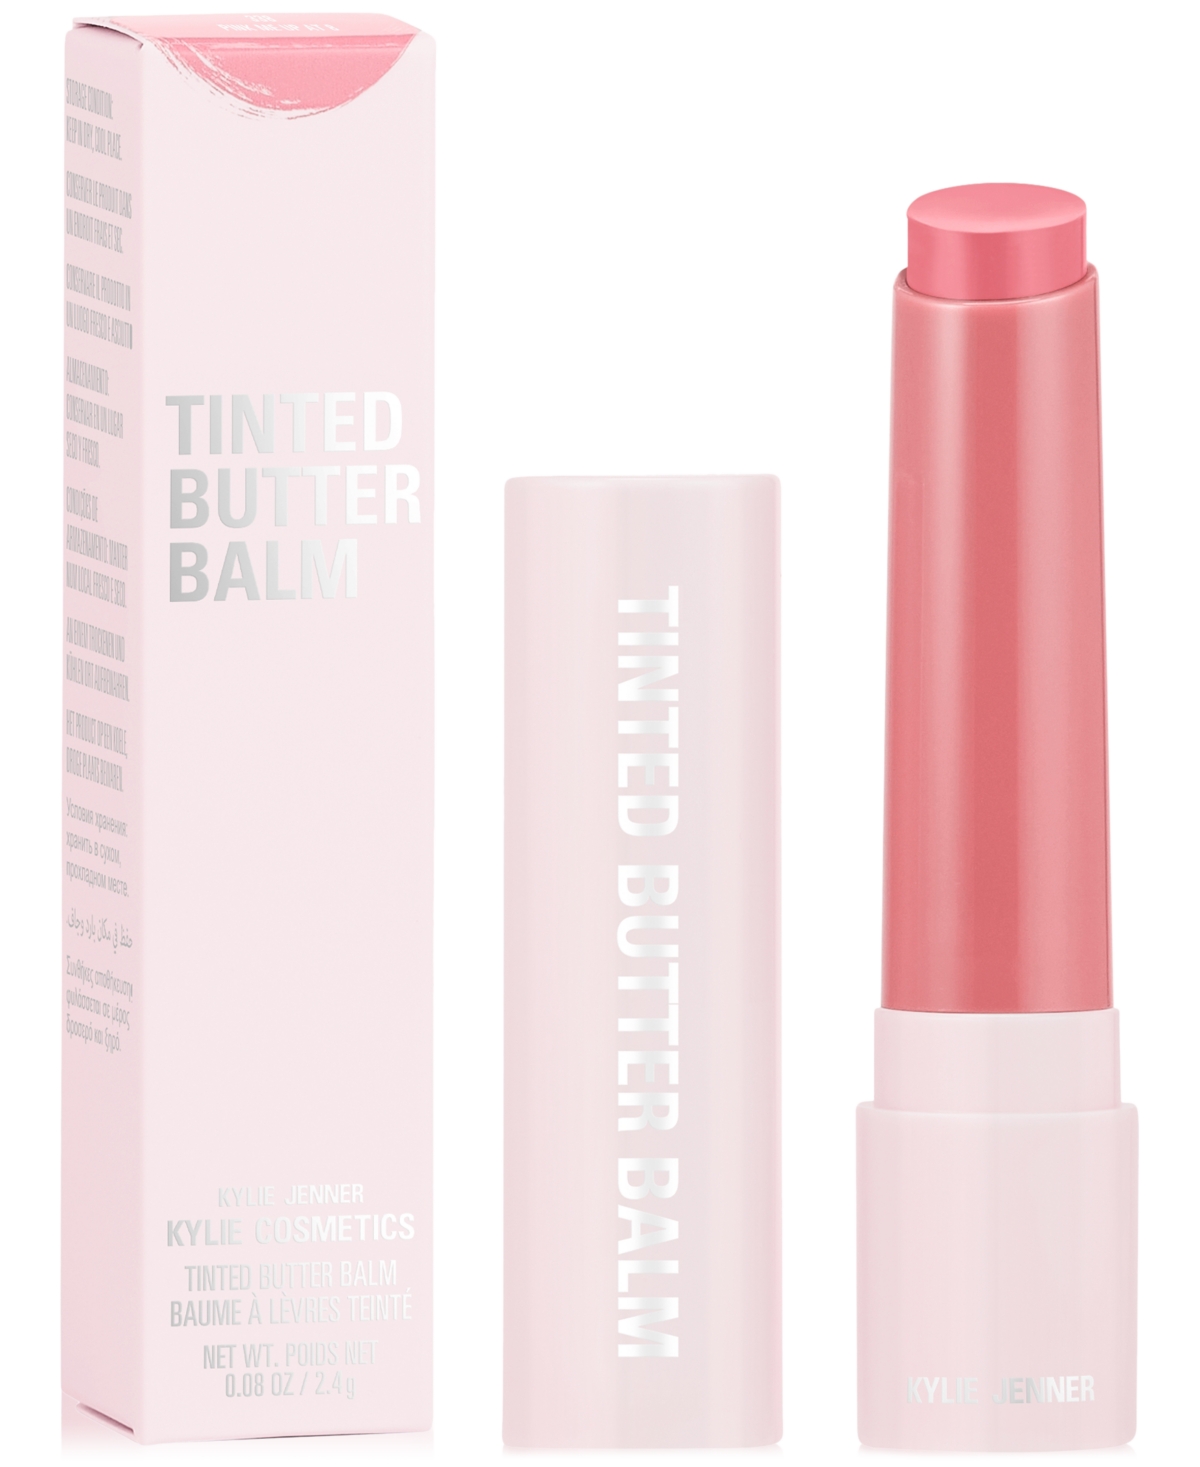 Kylie Cosmetics Tinted Butter Balm In Pink Me Up At